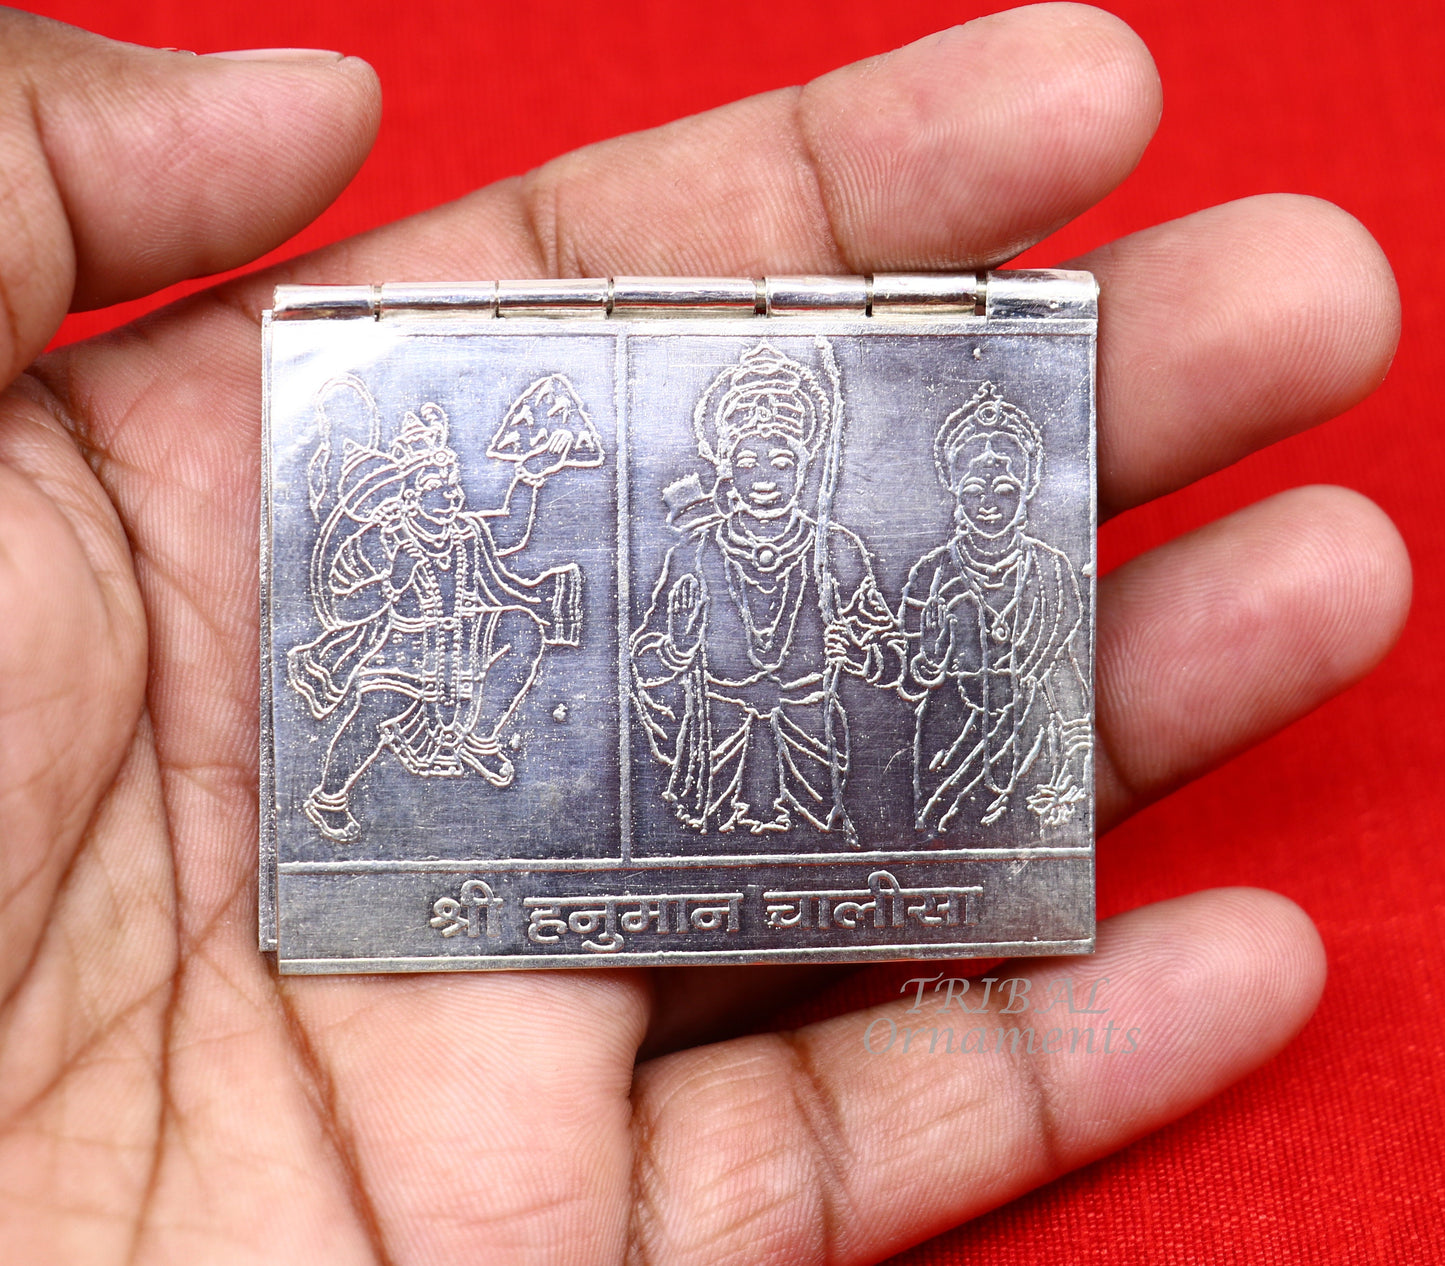 925 sterling silver handmade complete Shree Hanuman Chalisa with Arti small mini 4 page book, amazing puja article from India su832 - TRIBAL ORNAMENTS